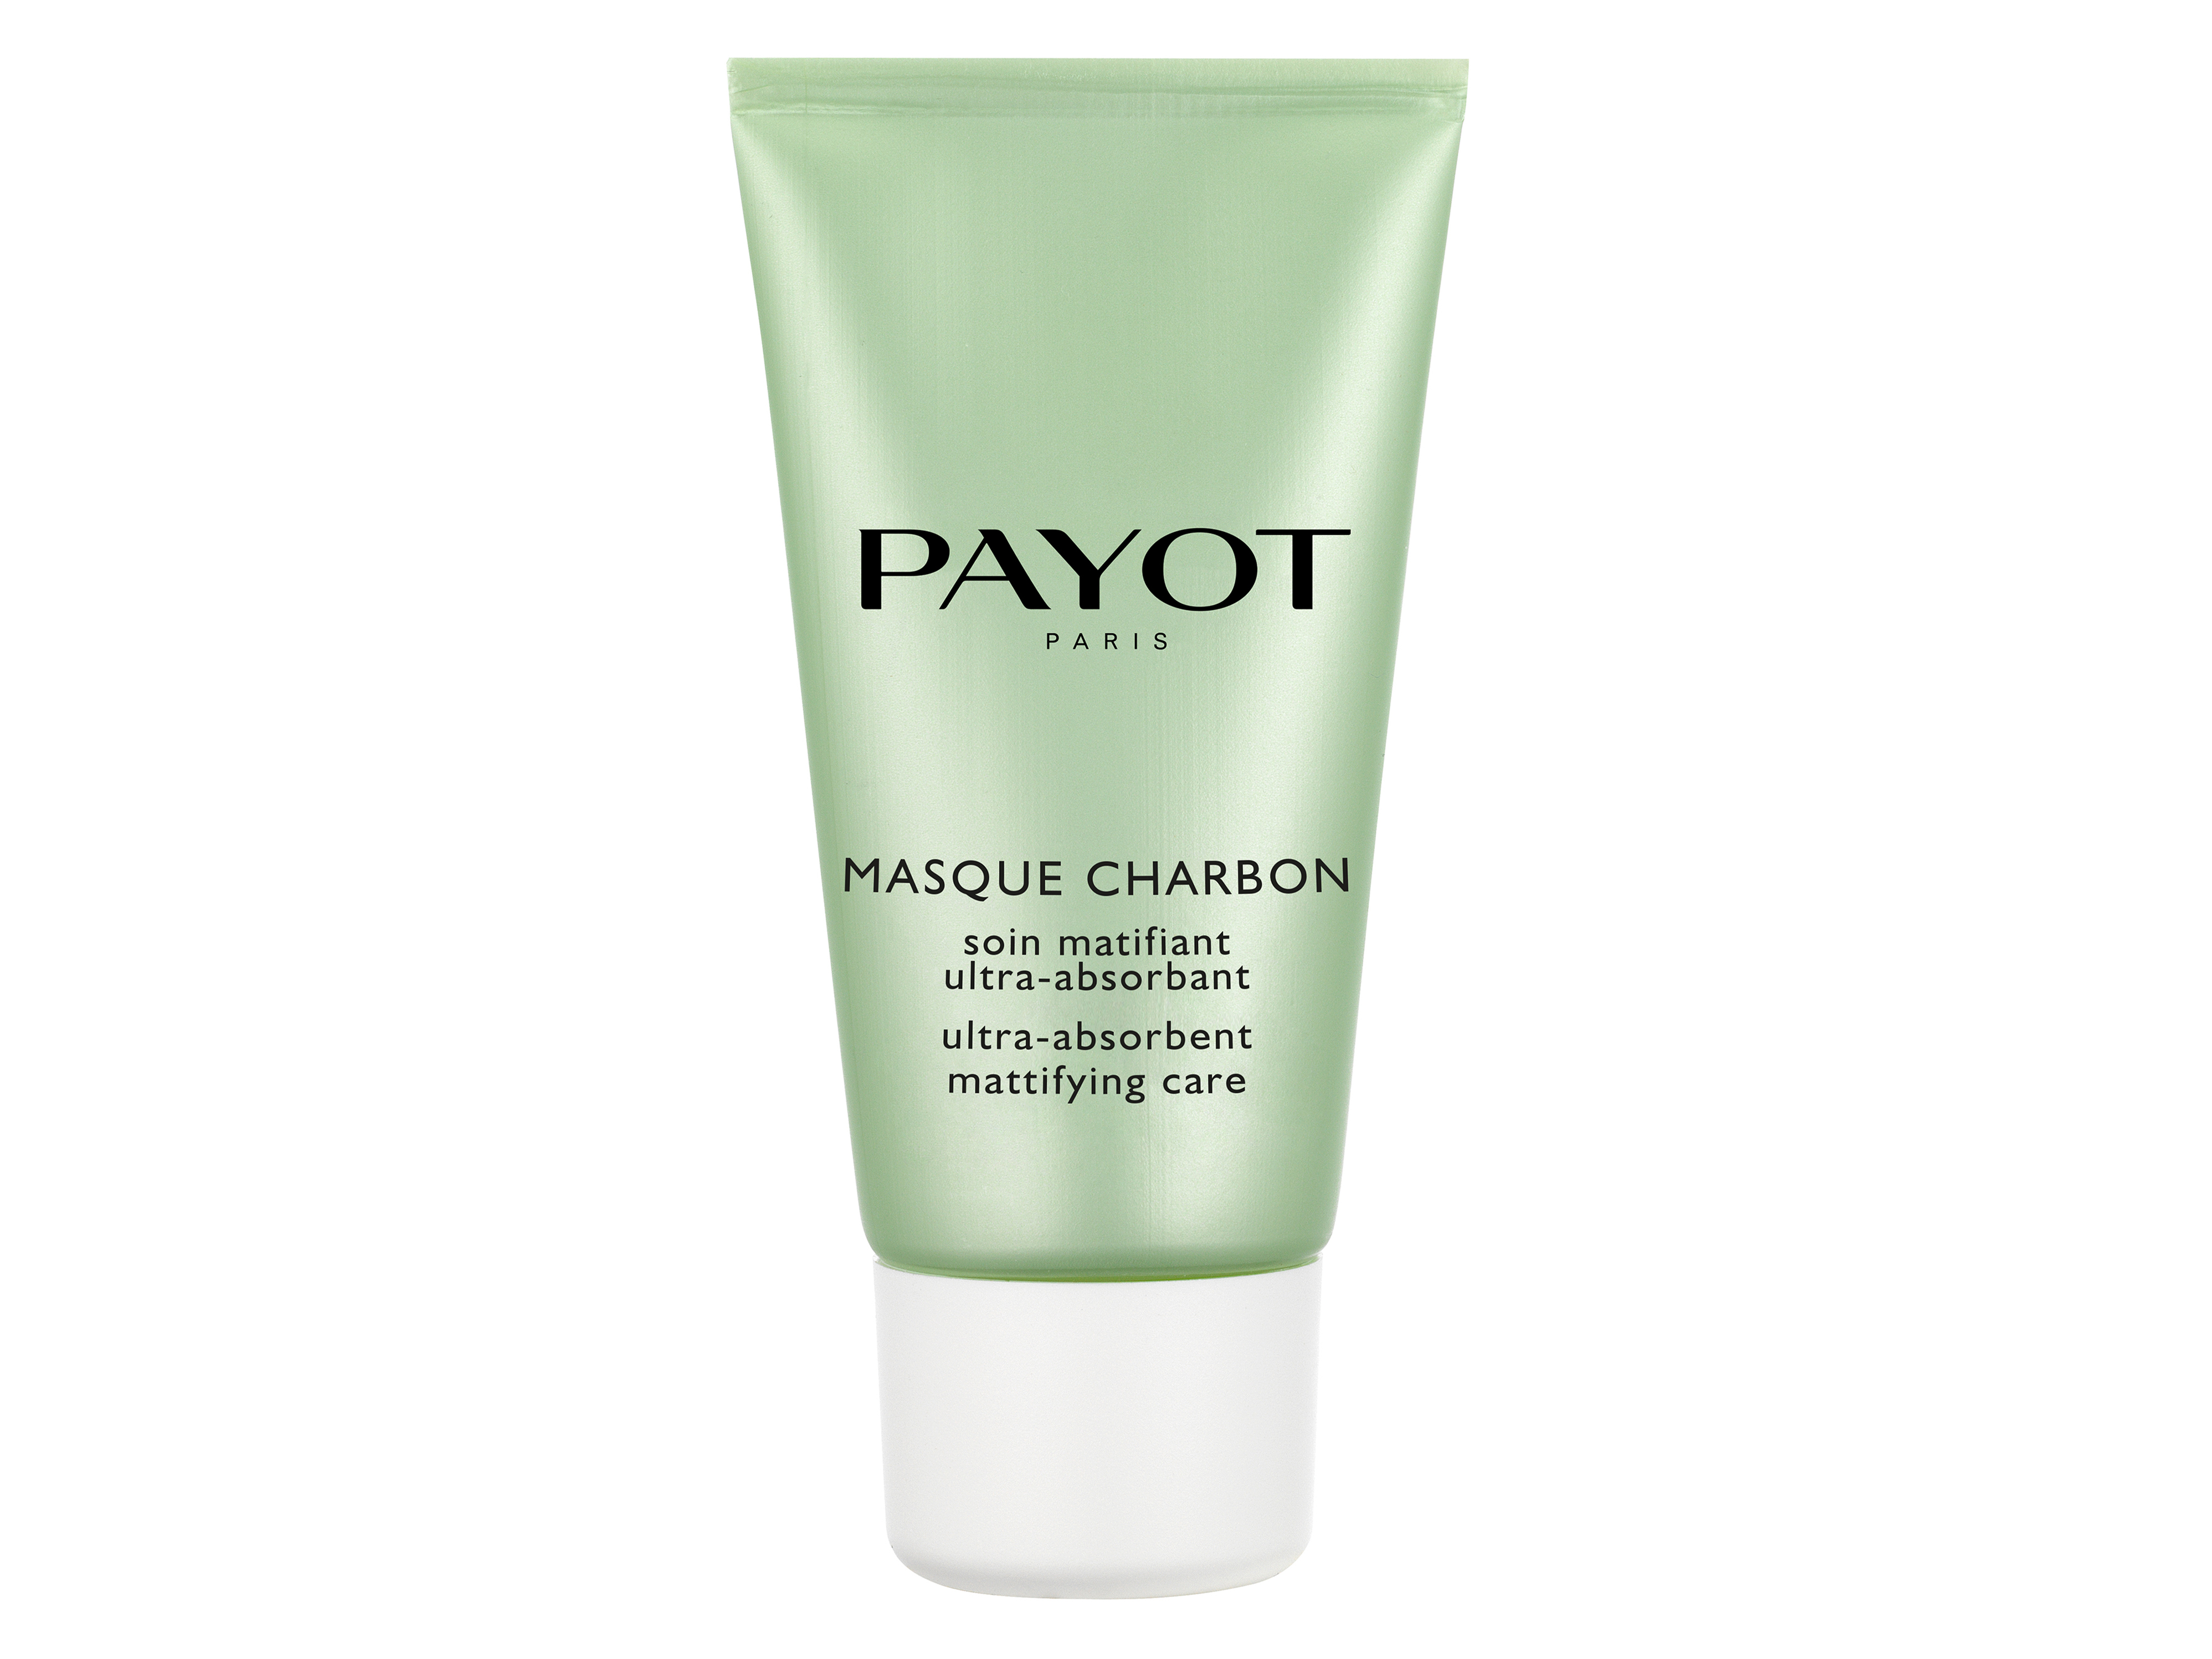 Payot Pate Grise Masque Charbon, 50 ml